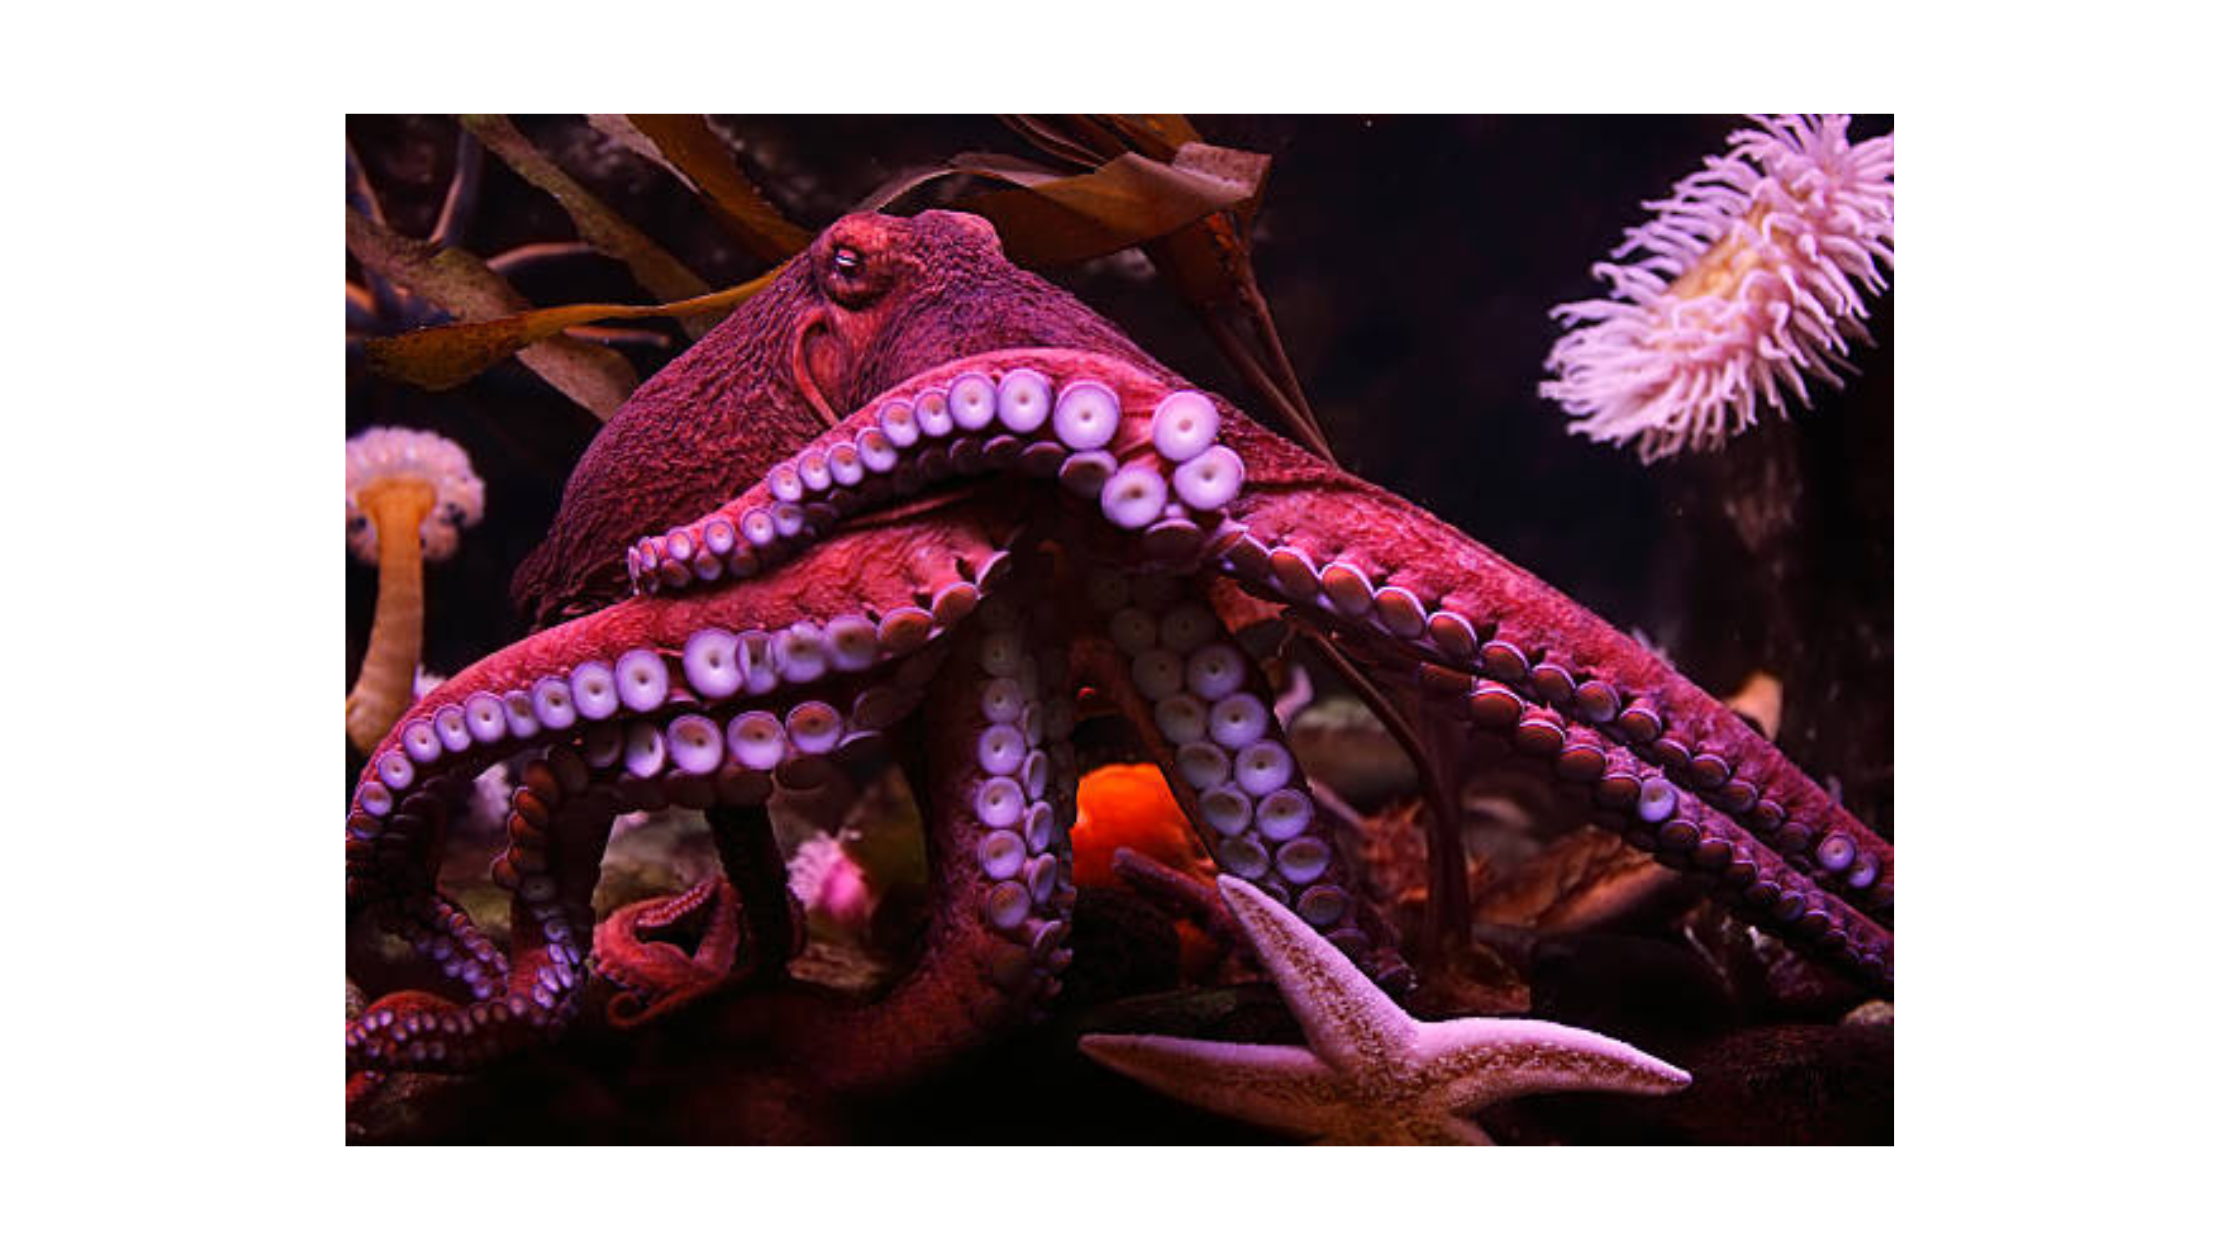 3D Printed Octopus-Inspired Skin Advancing Surgery, Construction & More